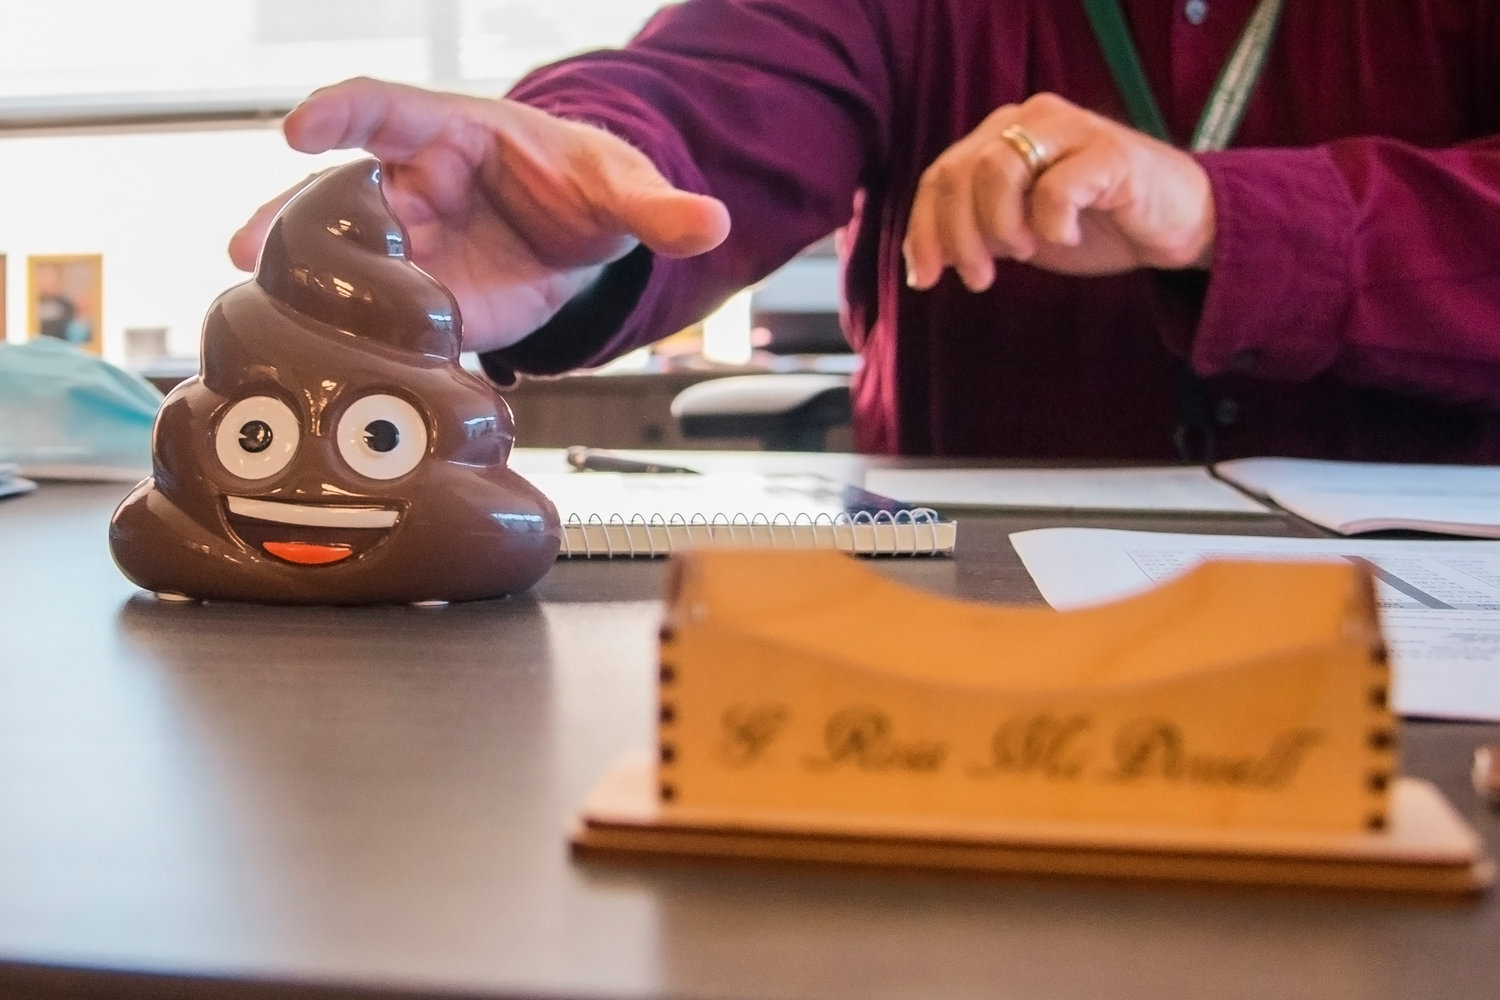 Ross McDowell reaches for a poop emoji coin bank that doubles as a paperweight in his office at the Historic Lewis County Courthouse in Chehalis.